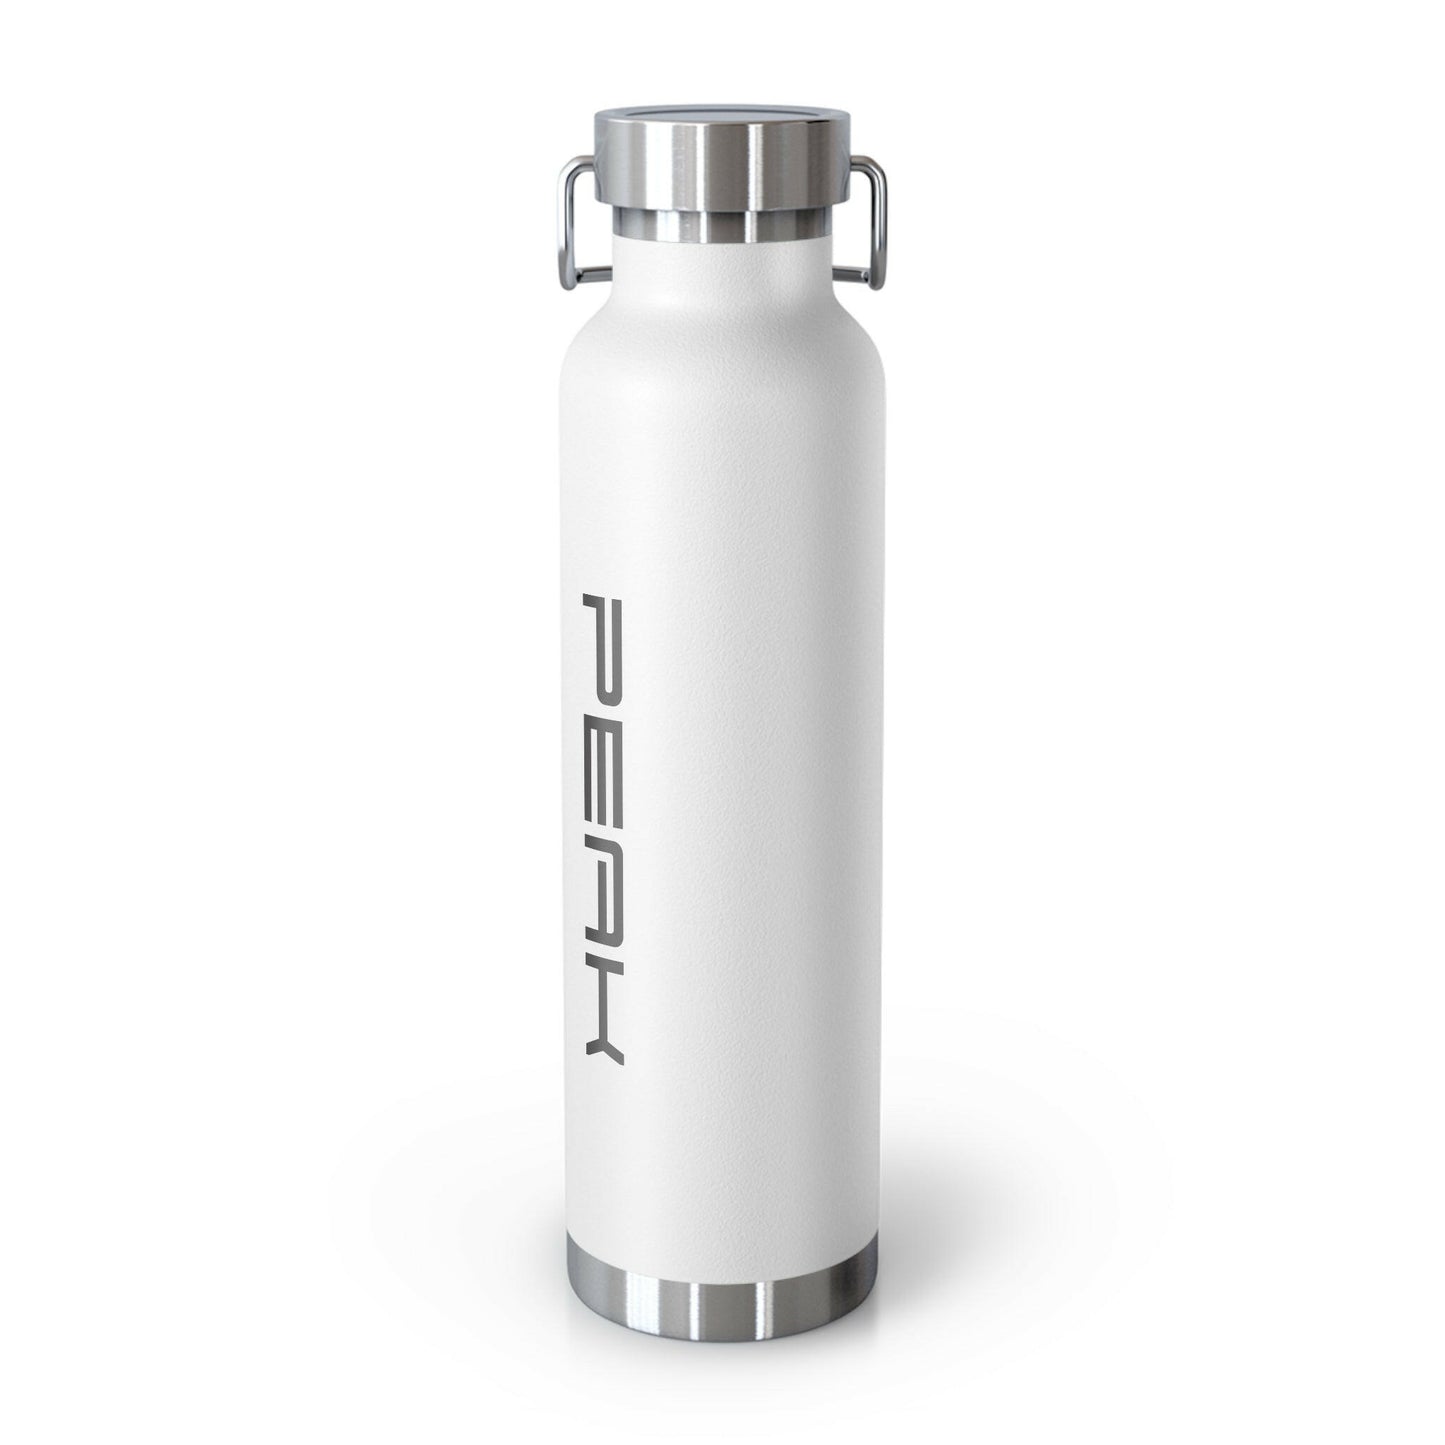 PEAK Vacuum Insulated Bottle 650ml (Available in 8 Colors).